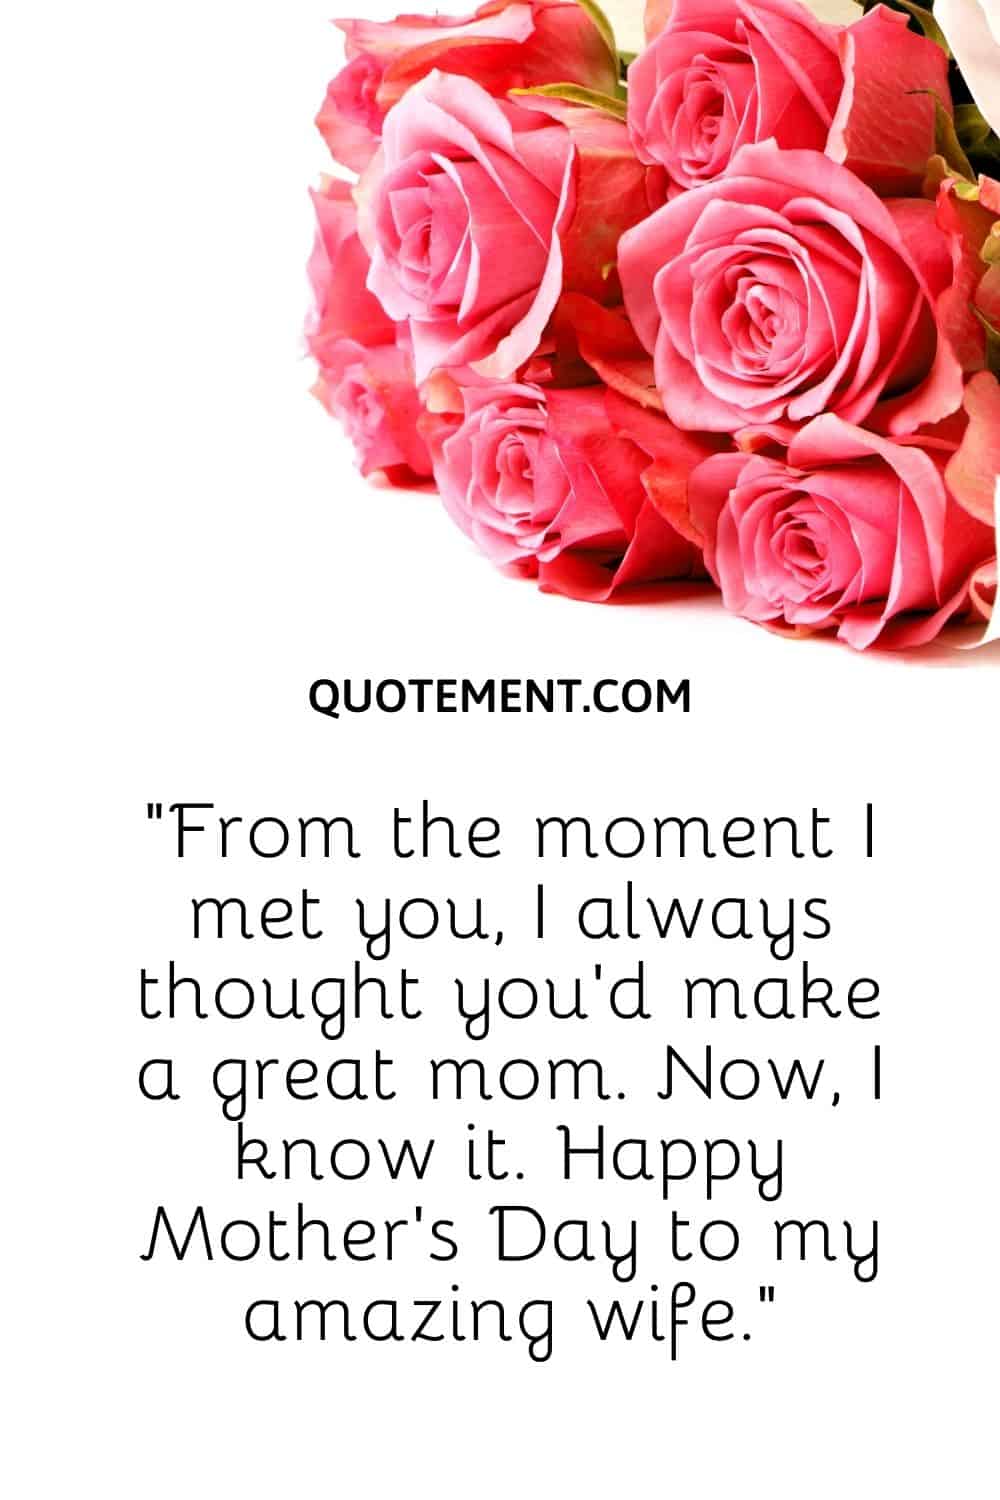 From the moment I met you, I always thought you’d make a great mom